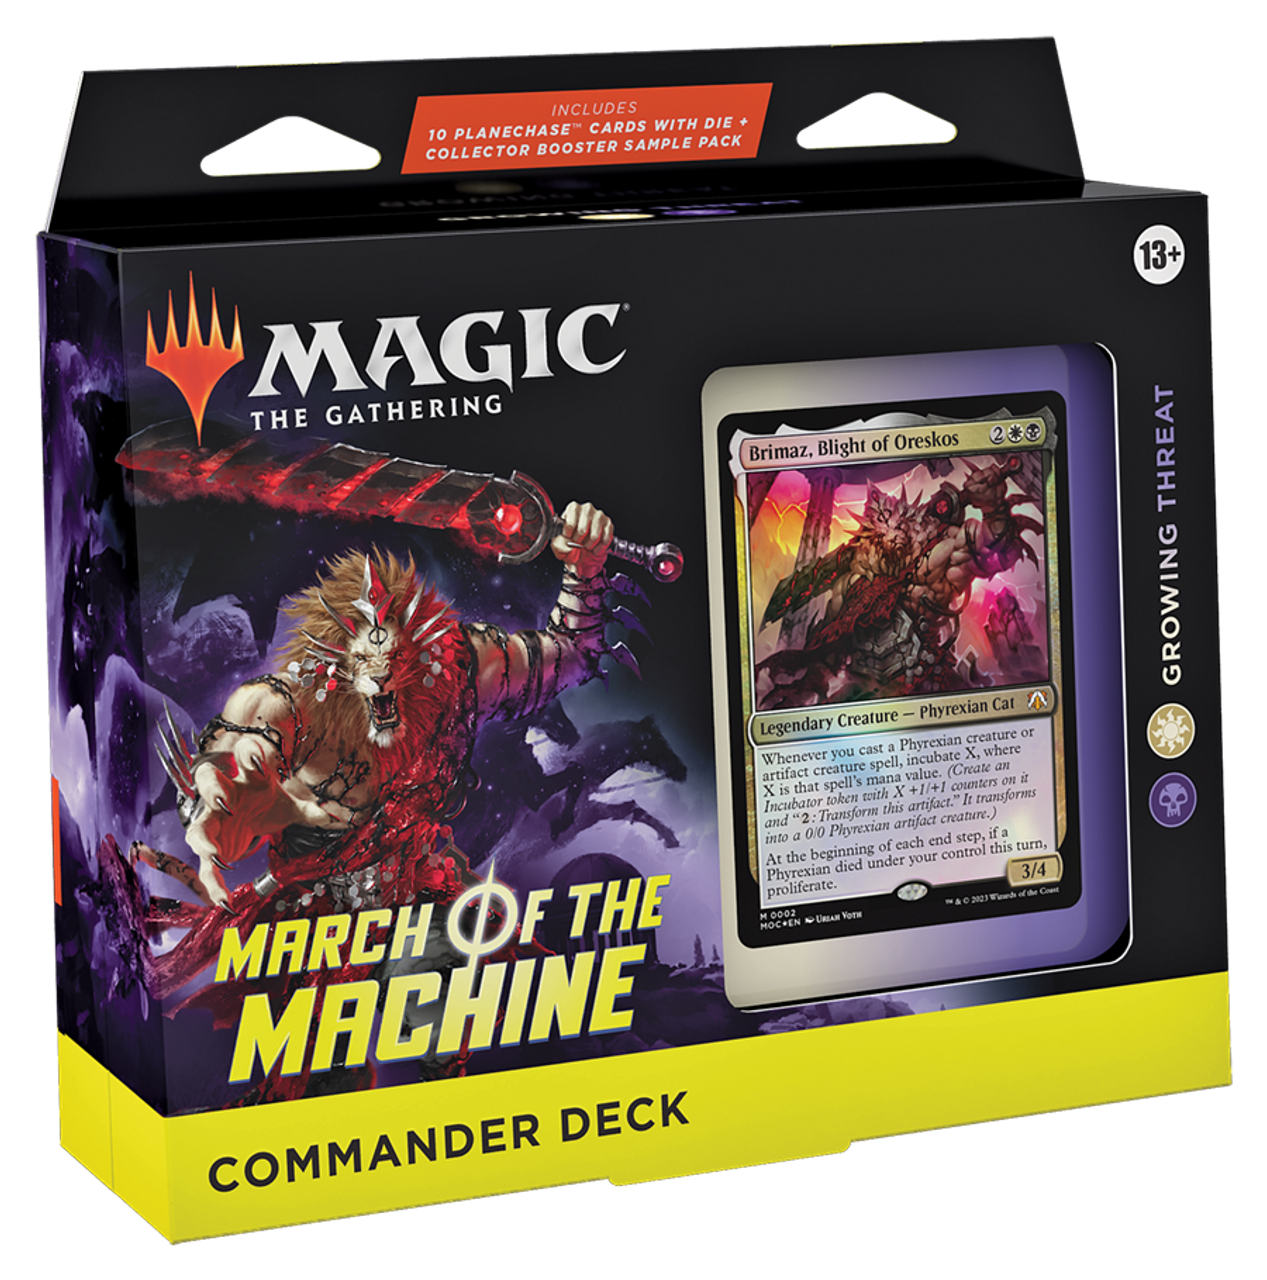  Magic: The Gathering March of the Machine Commander Deck - Call  for Backup (100-Card Deck, 10 Planechase cards, Collector Booster Sample  Pack + Accessories) : Toys & Games